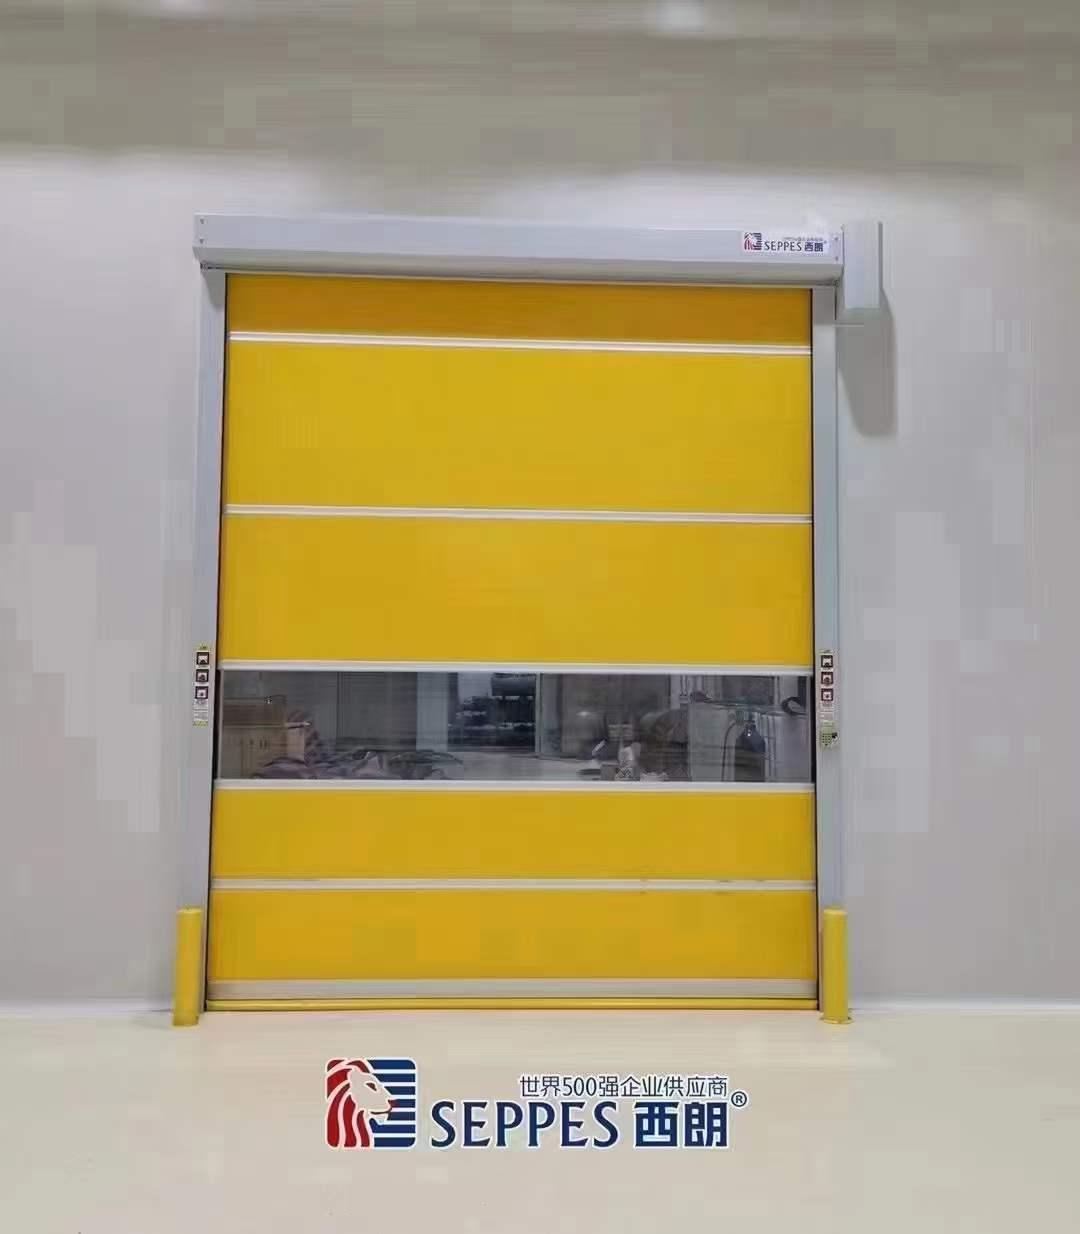 Why does the circuit industry choose to install high speed door